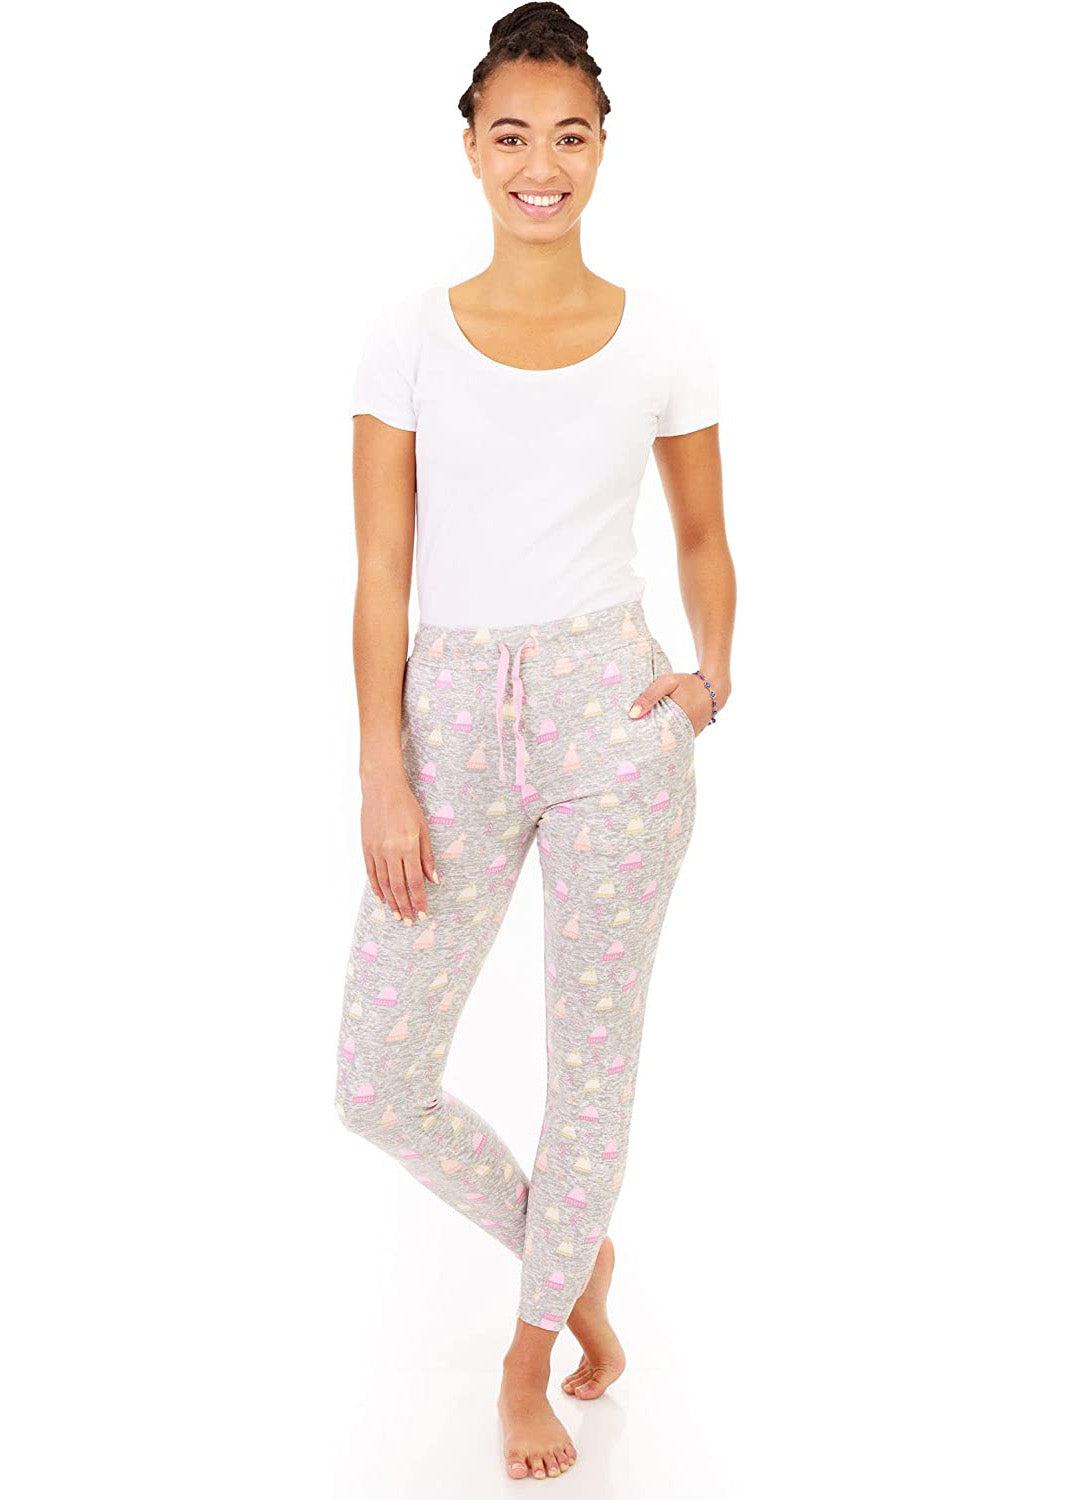 PJ joggers with soft velvety texture, stretch, elastic waistband, drawstring, and stylish ankle cuff. This pattern is little pink, yellow and light orange tuques. It has a pink drawstring that matches the prints